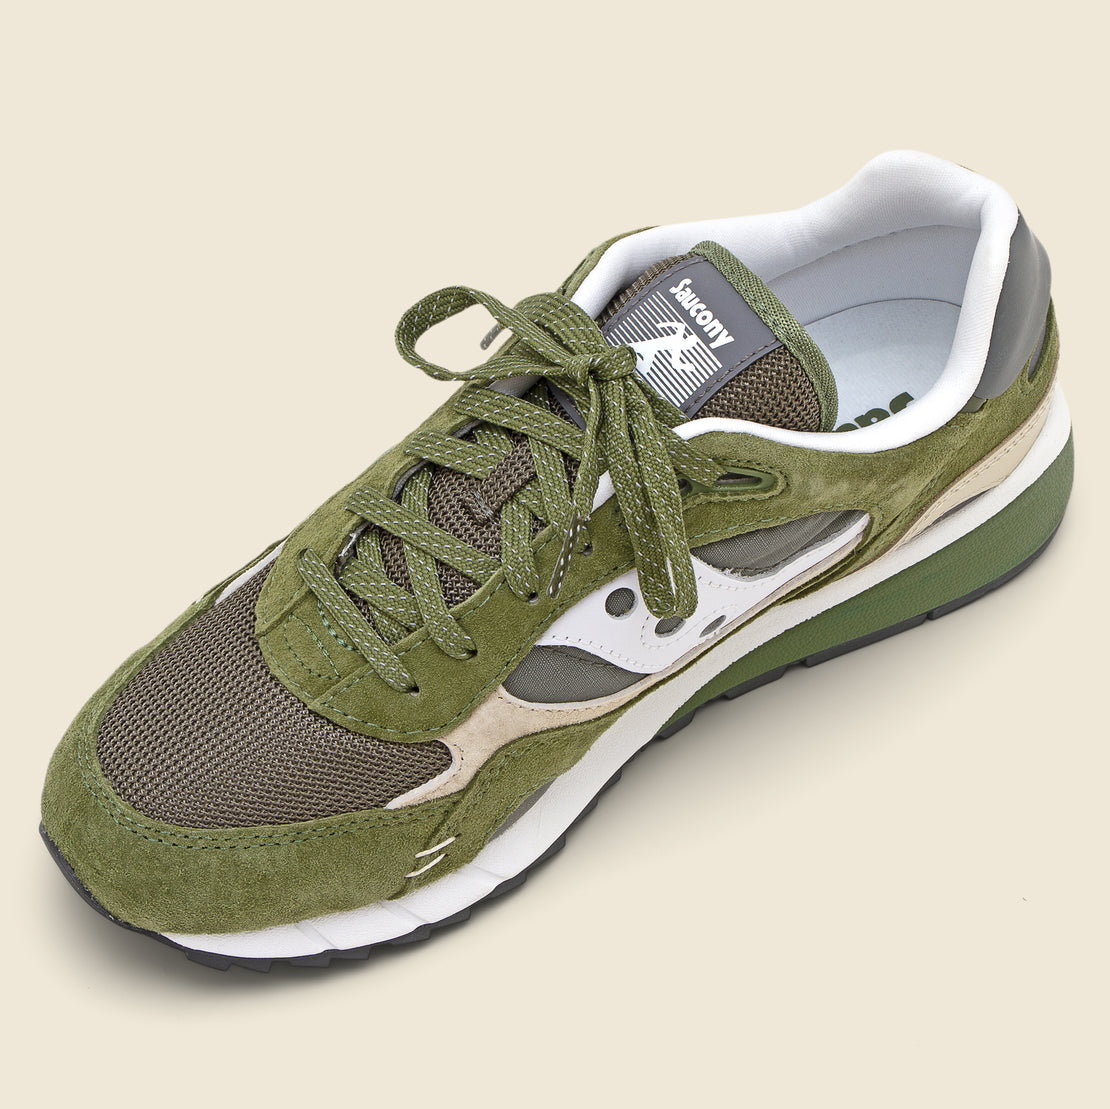 Shadow 6000 Sneaker - Olive - Saucony - STAG Provisions - Shoes - Athletic